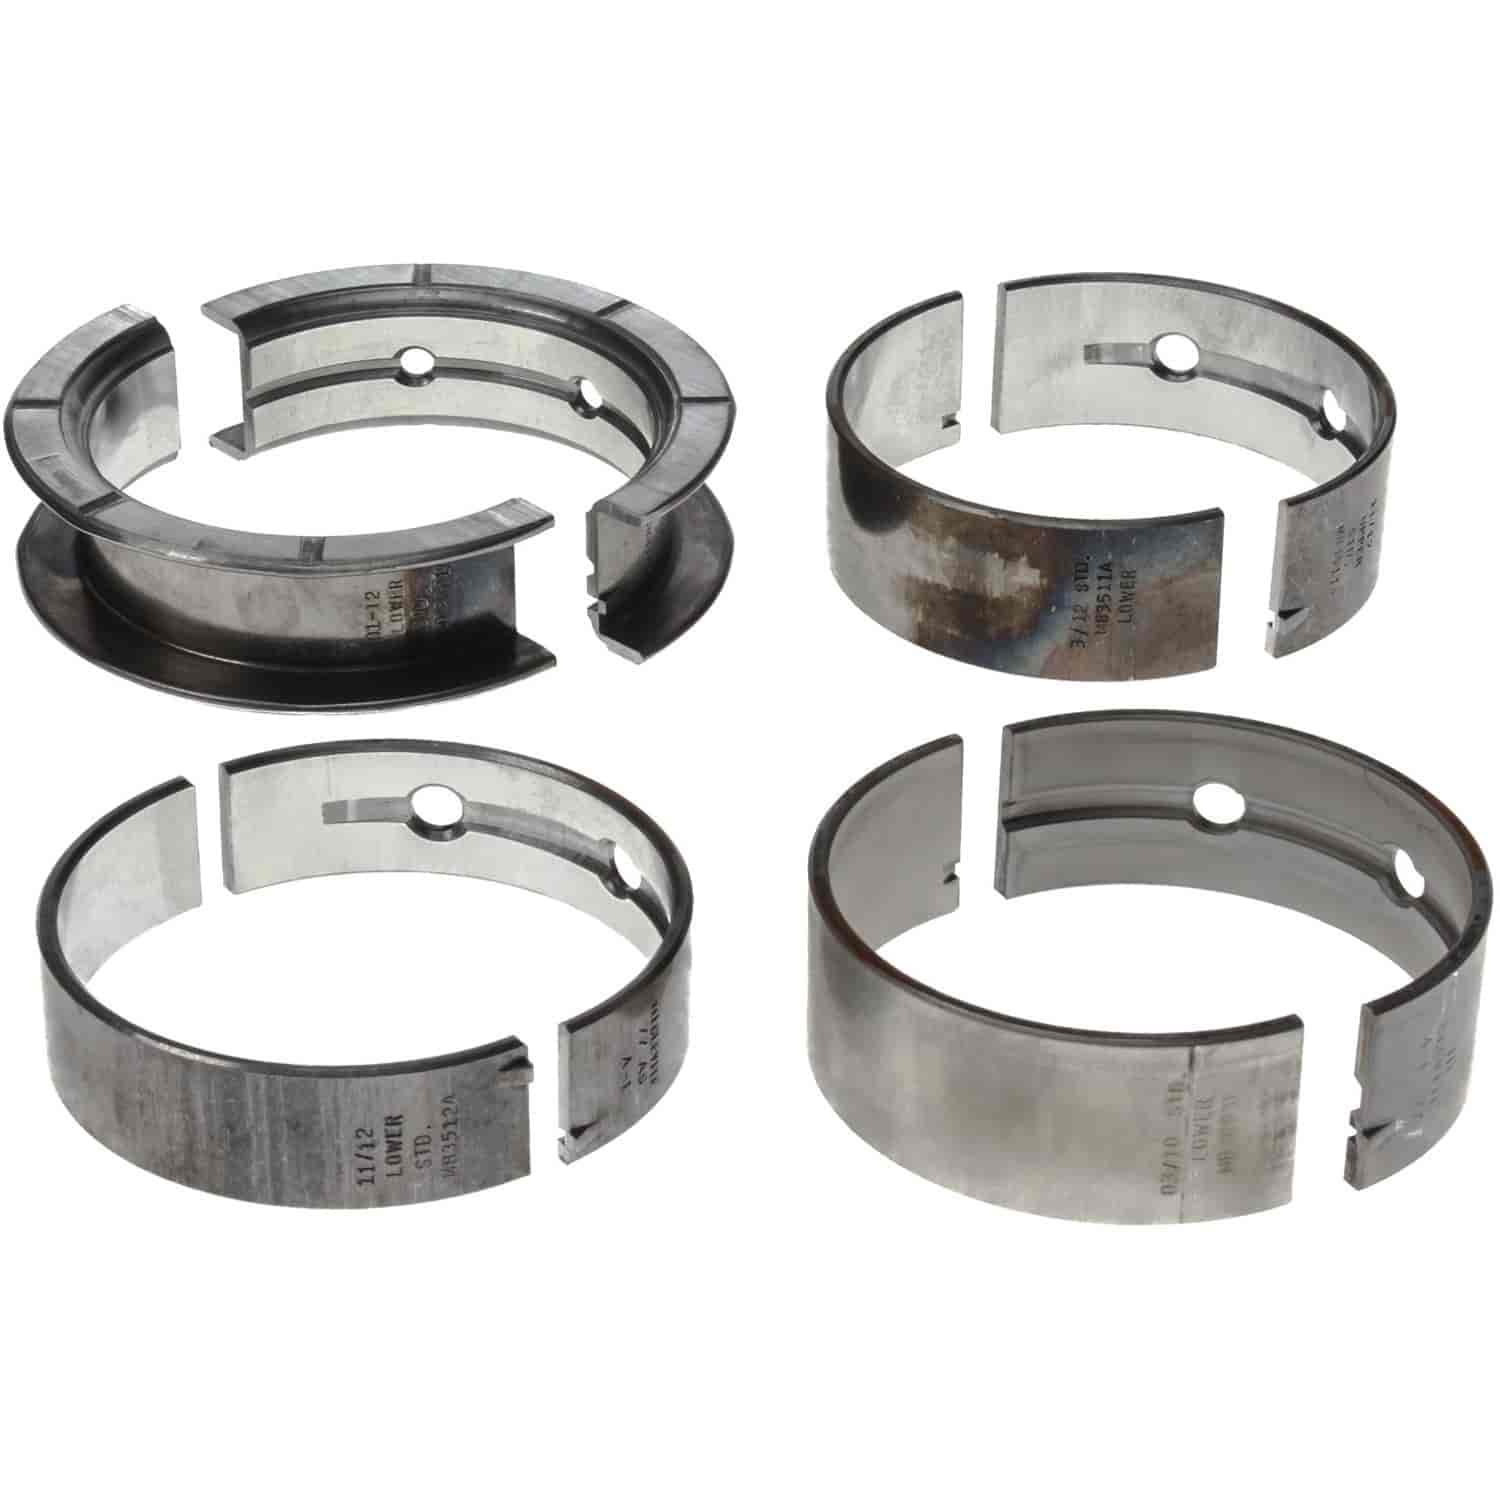 Main Bearing Set Chevy 2006-2007 V6 3.5L with -.50mm Undersize